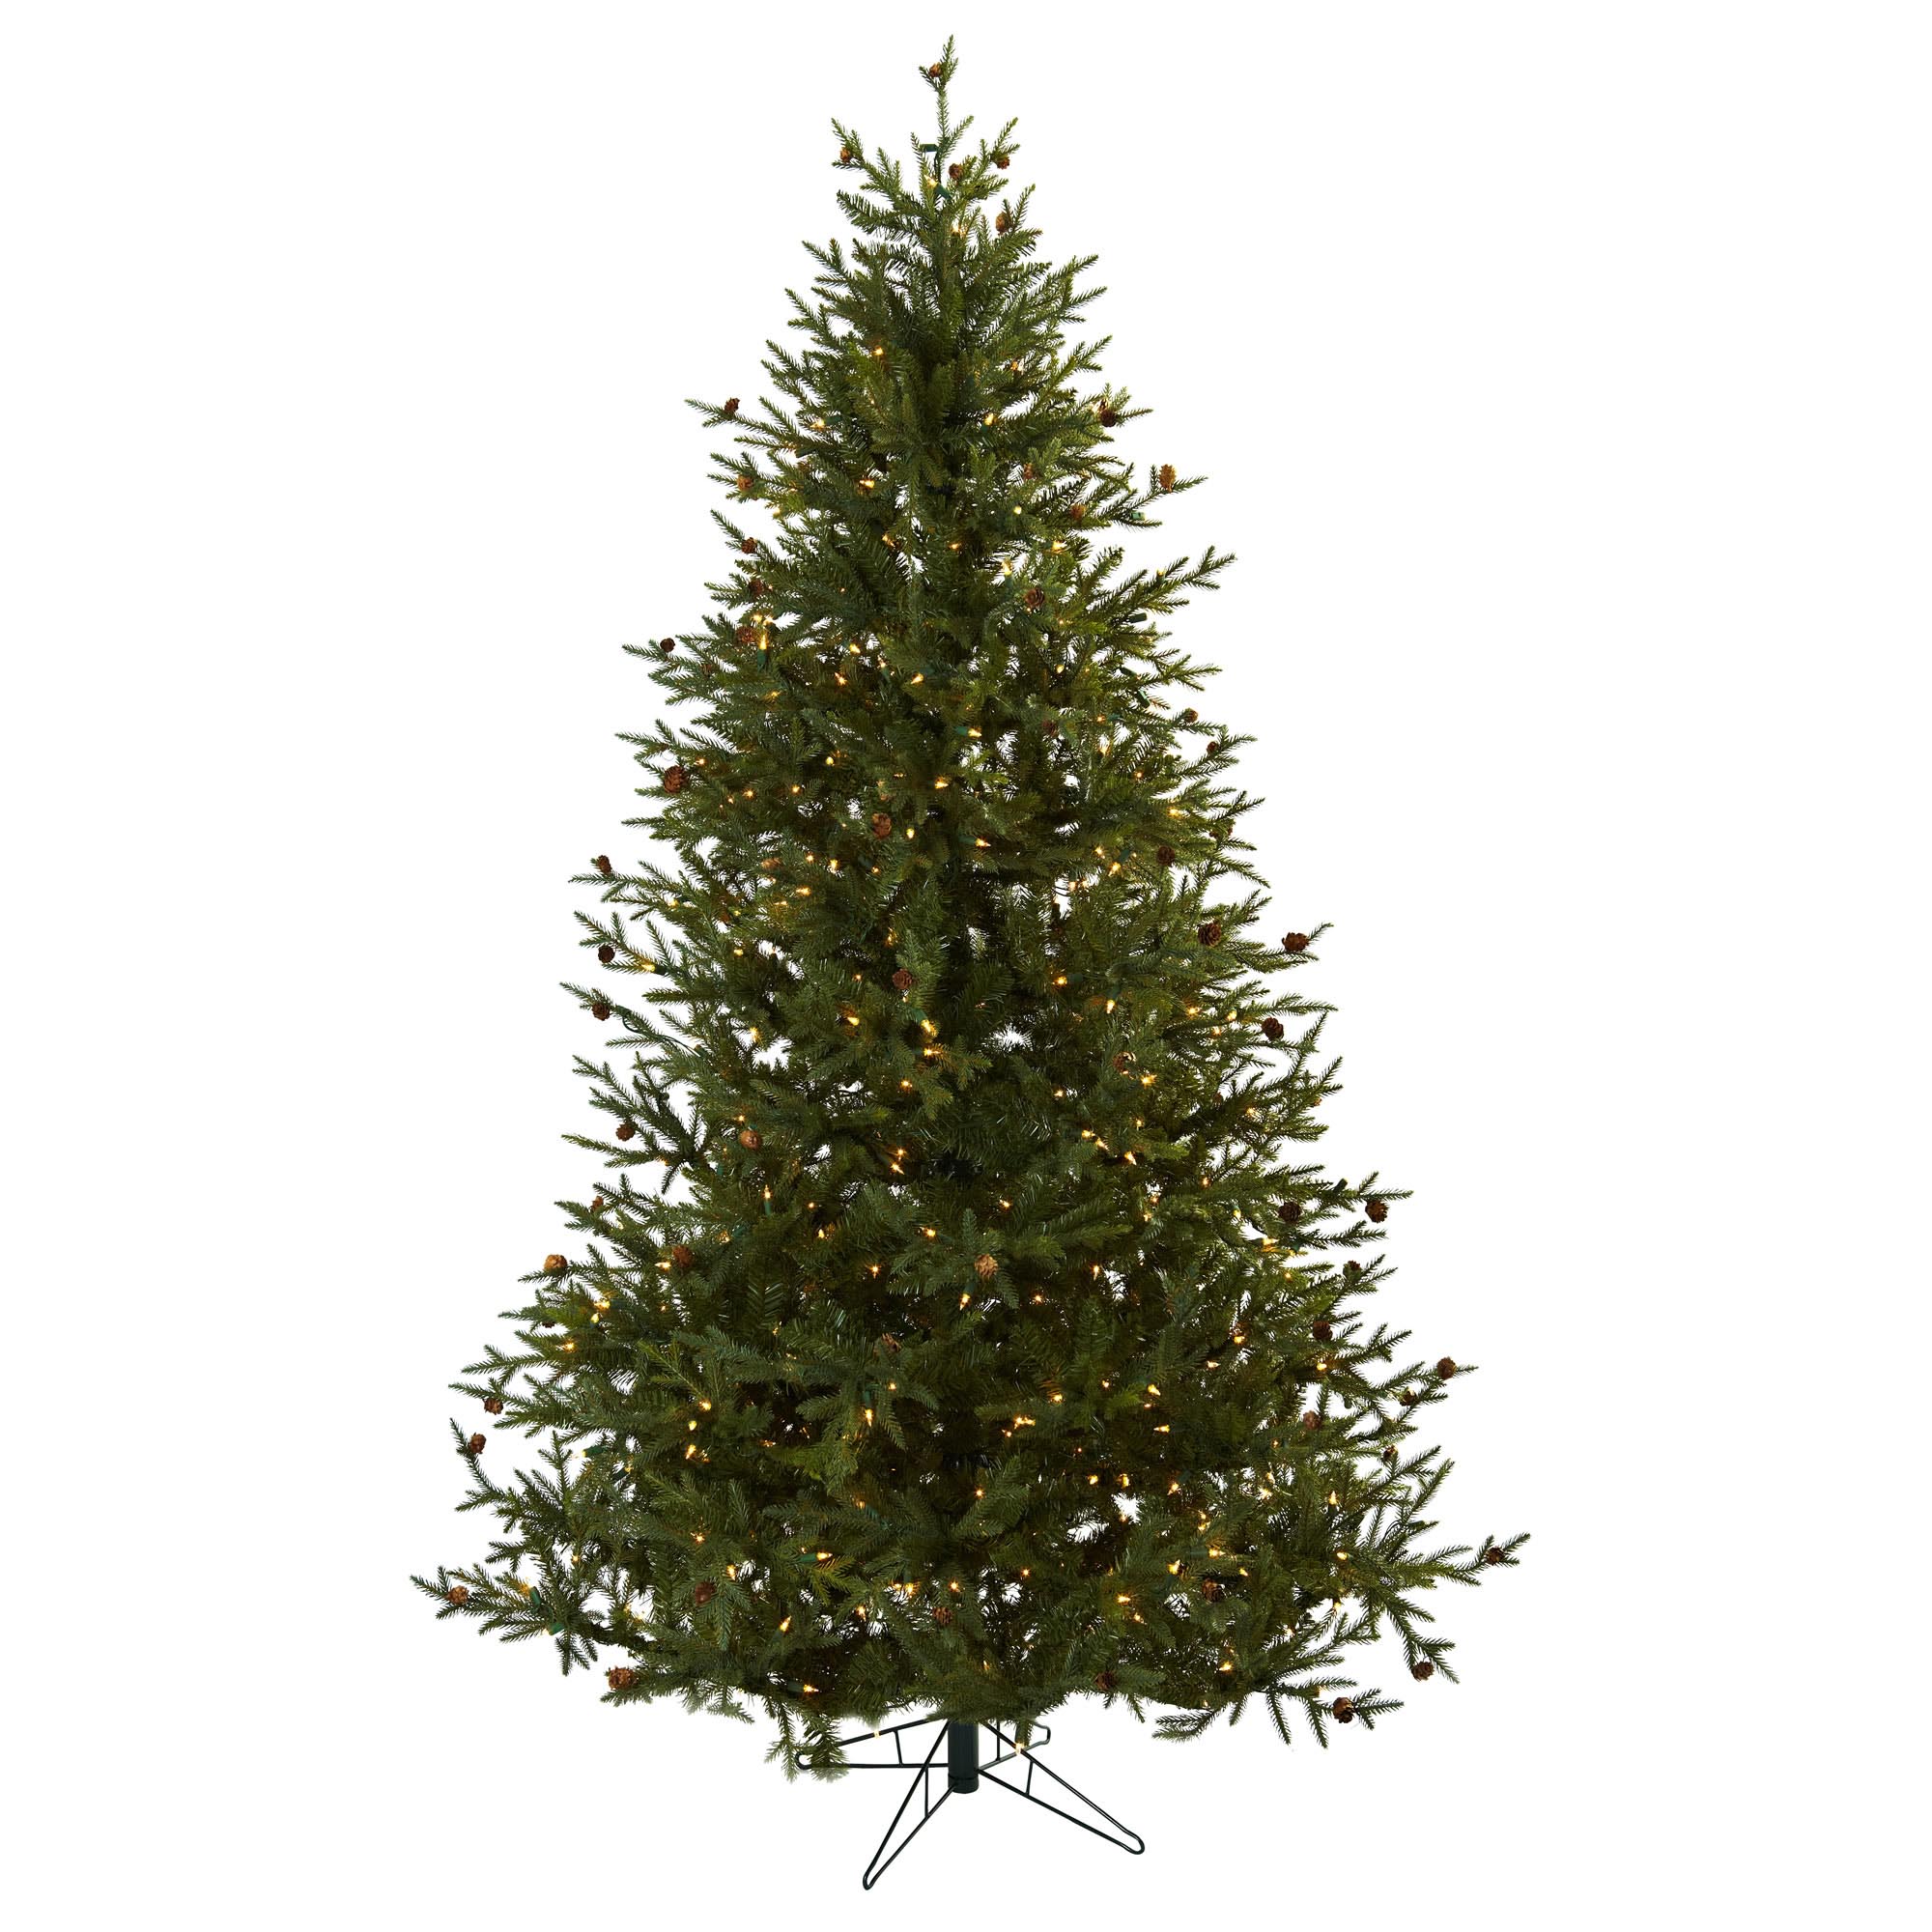 7.5 Foot Artificial Classic Pine Tree W/ Pine Cones: All-lit Lights